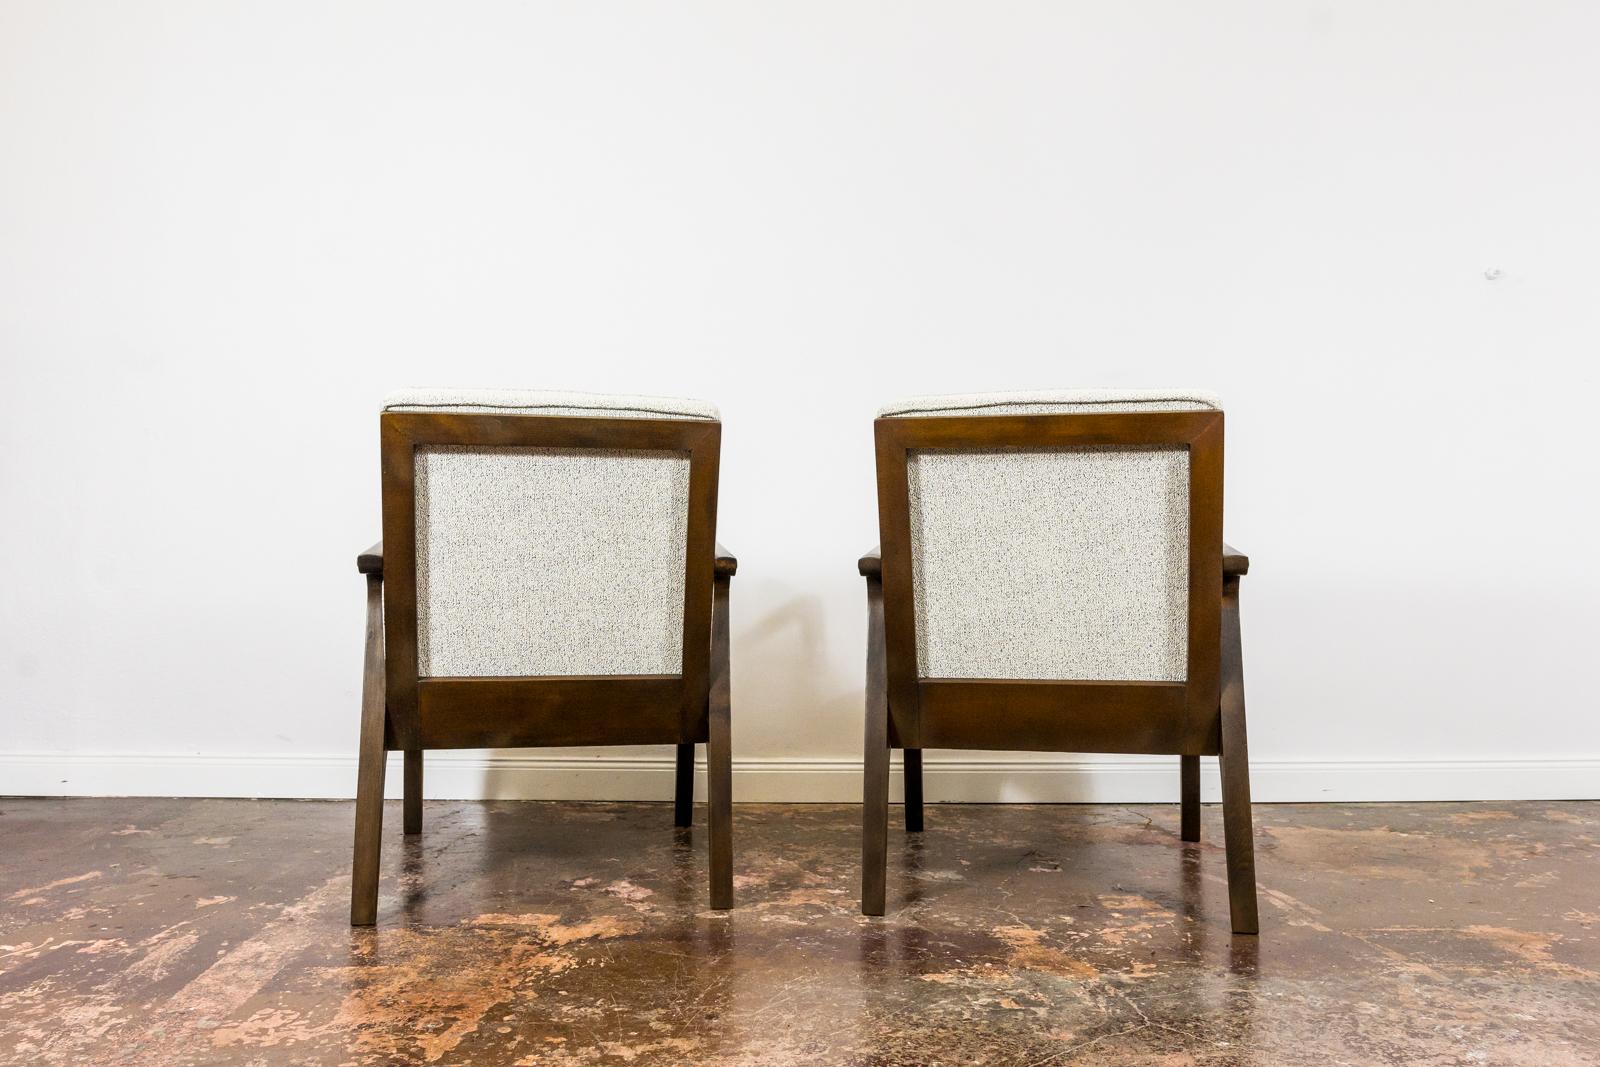 Pair of Mid-Century Armchairs from Prudnickie Fabryki Mebli 1960's, Poland For Sale 1